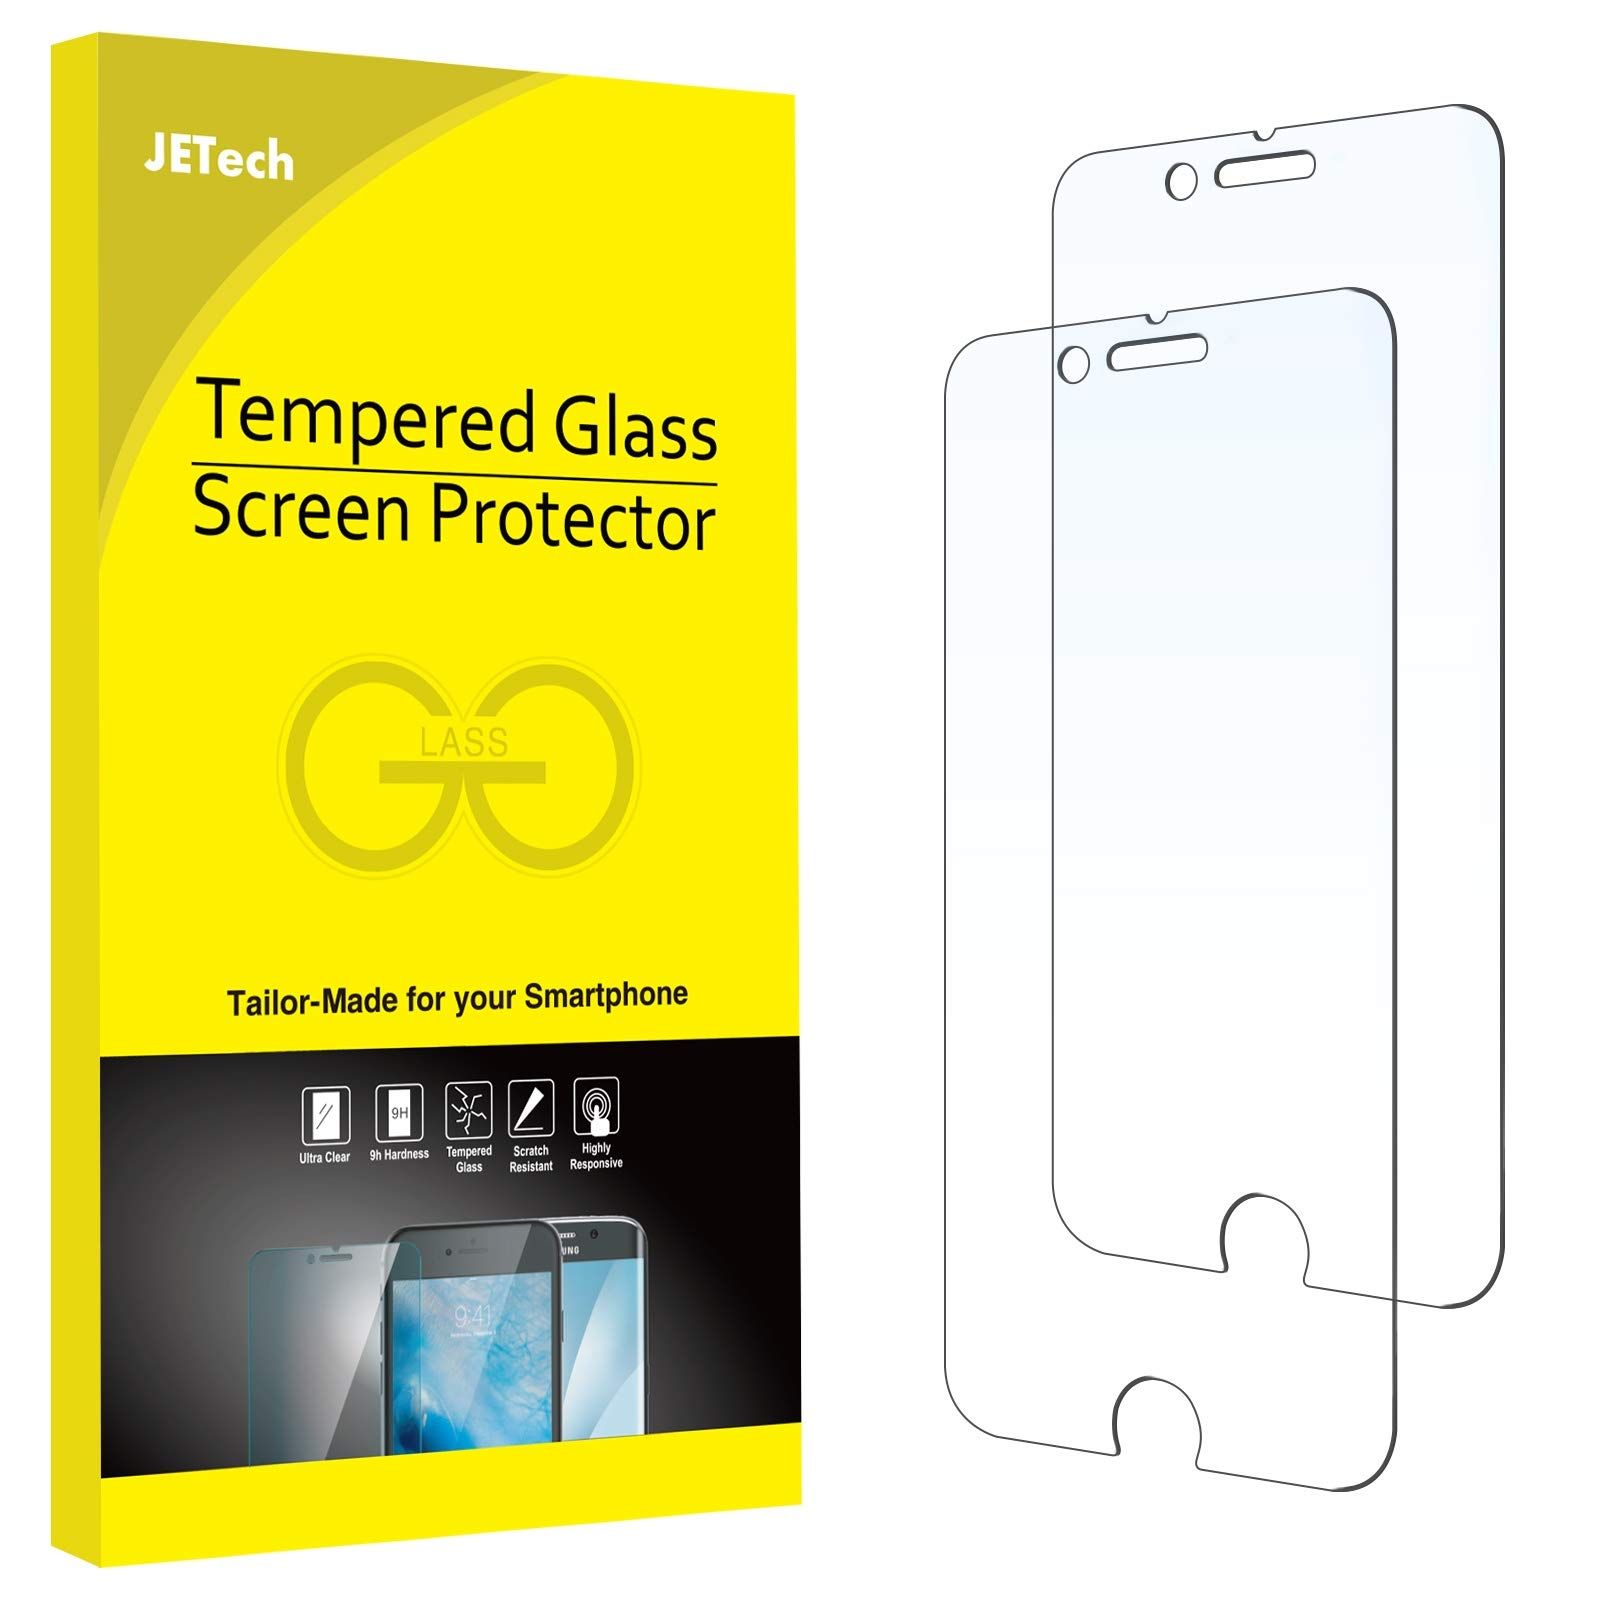 JETech Screen Protector for iPhone 7/8, 4.7-Inch, Tempered Glass Film, 2-Pack | Amazon (US)